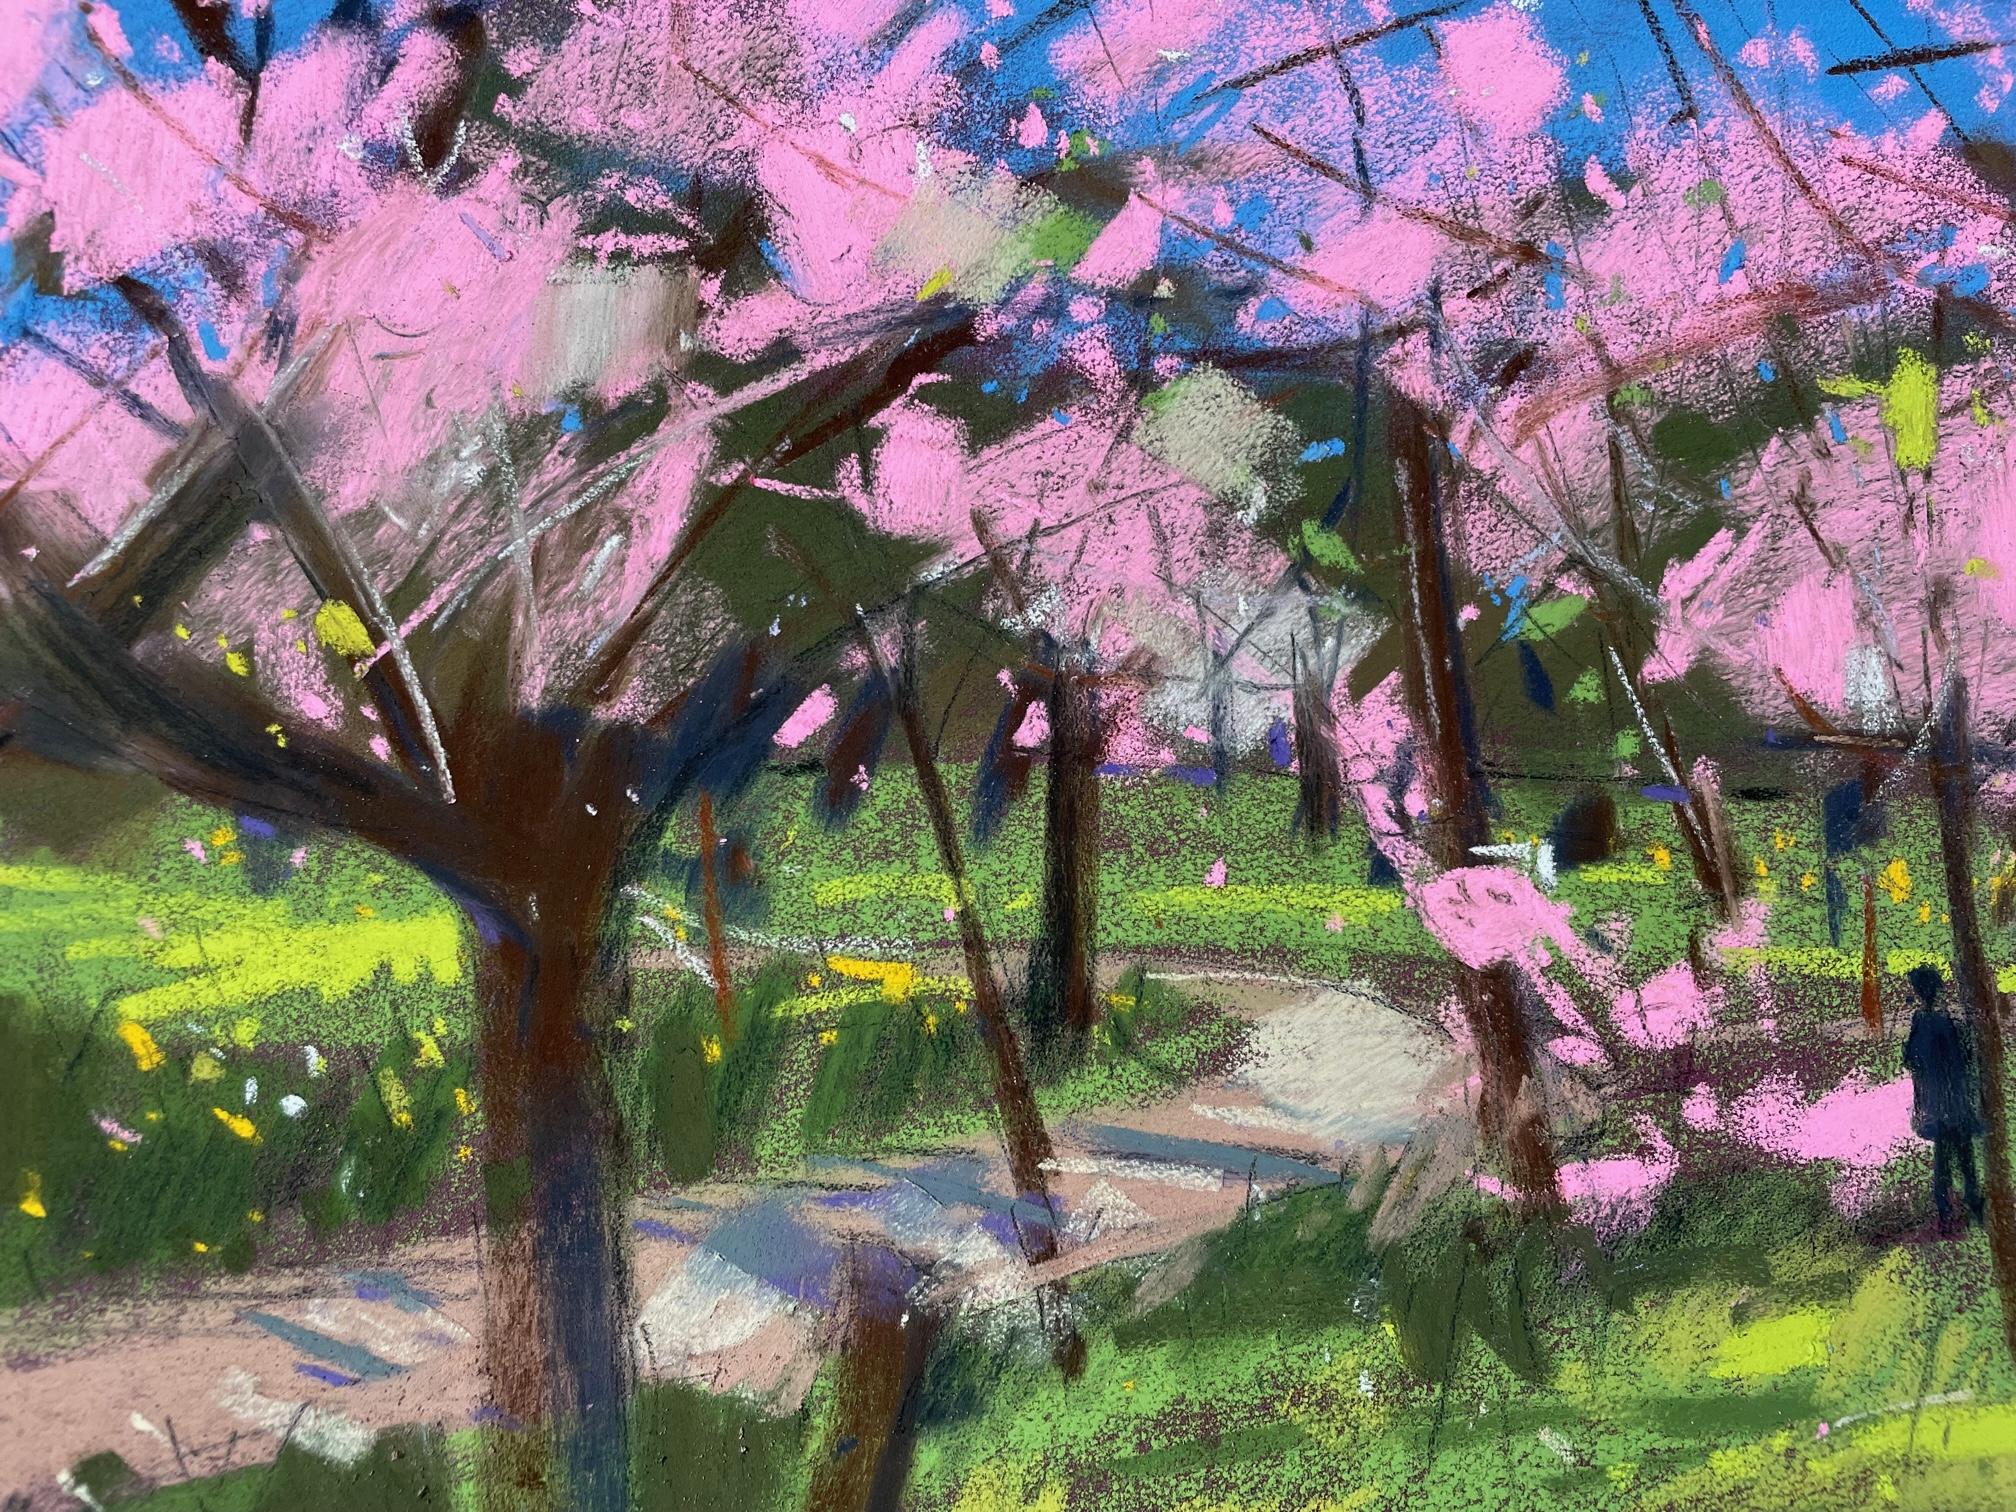 Spring Blossom By Natalie Bird [2023]

Pastel on thick Pastelmat paper. Fixed and mounted in an antique white acid free mountboard and sealed in protective cellophane envelope.

Additional information:
Original
Pastel
Image Size: H:25 cm x W:35